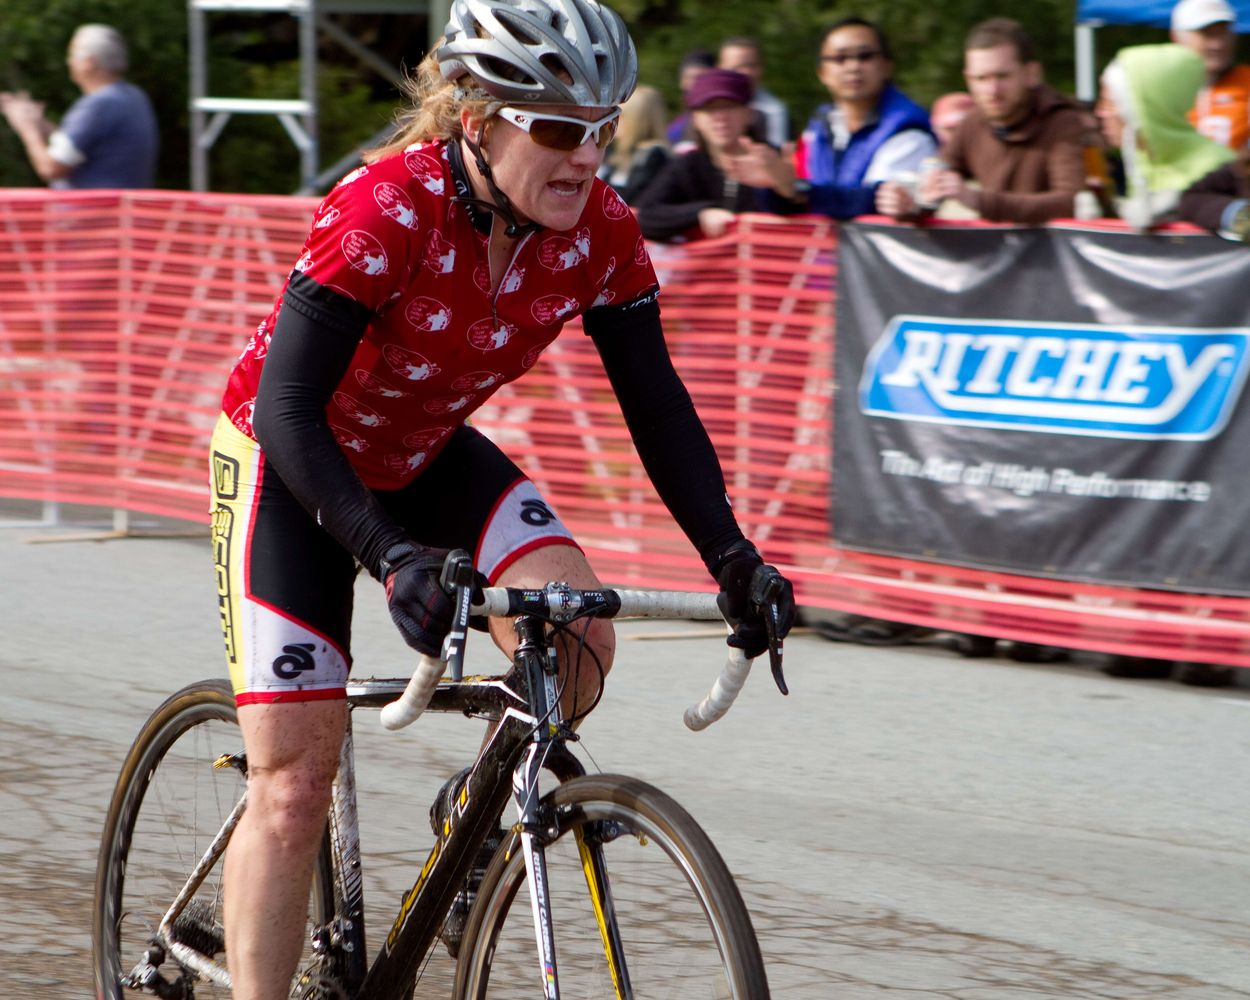 Kerry Barnholt took her third win in a row at the Bay Area Super Prestige series.  © Tim Westmore